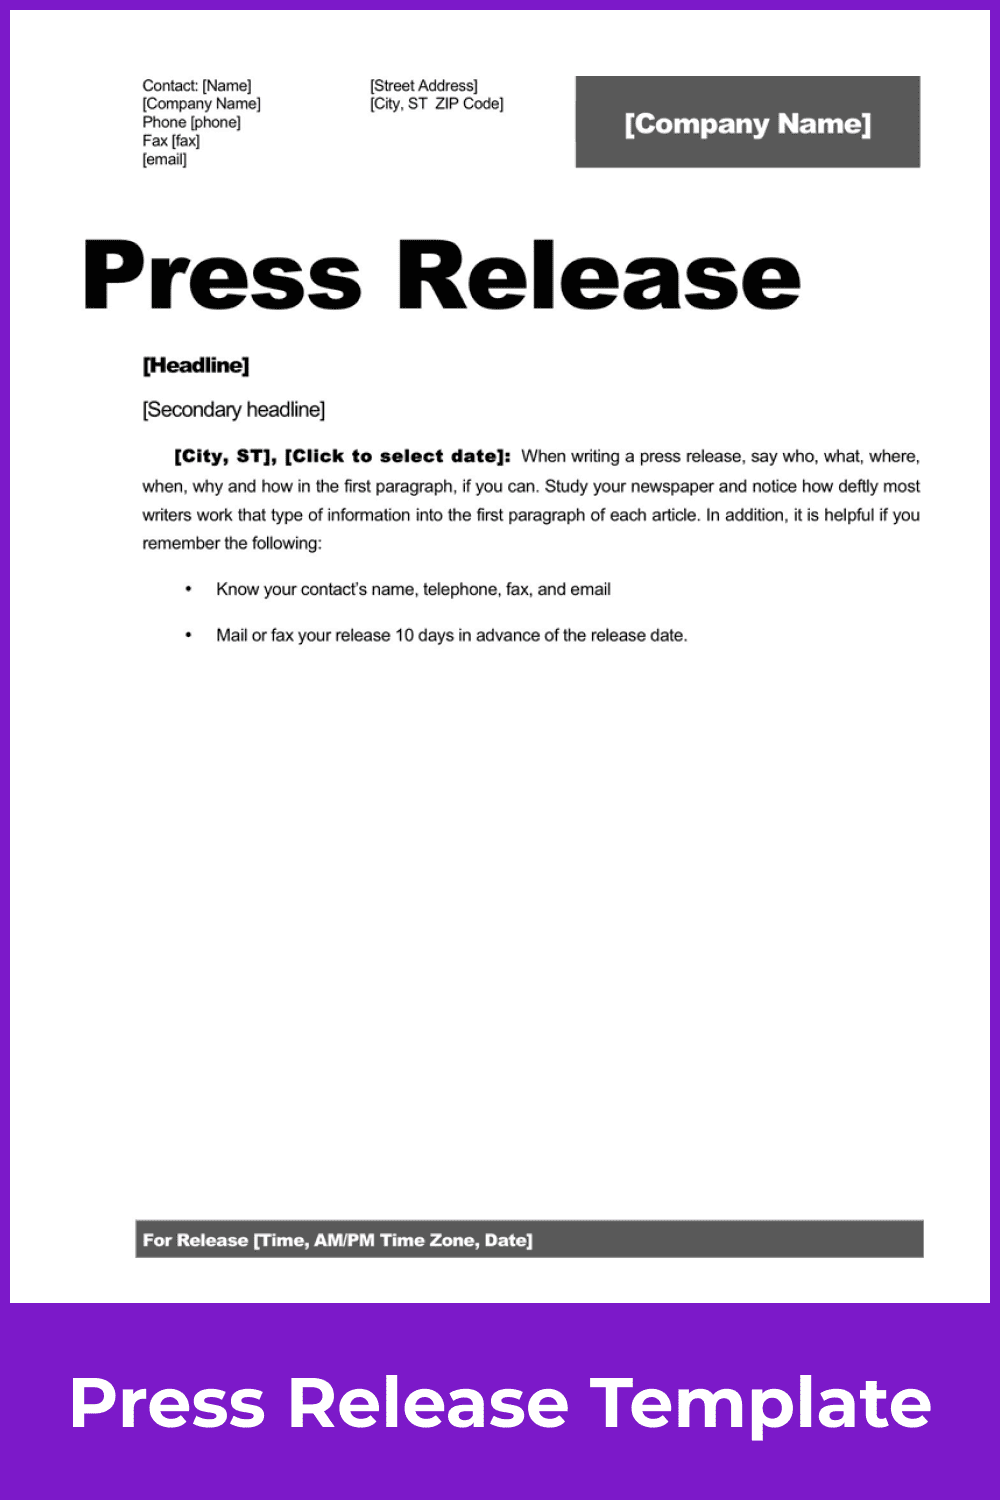 A simple press release template with the most accessible and user-friendly design.